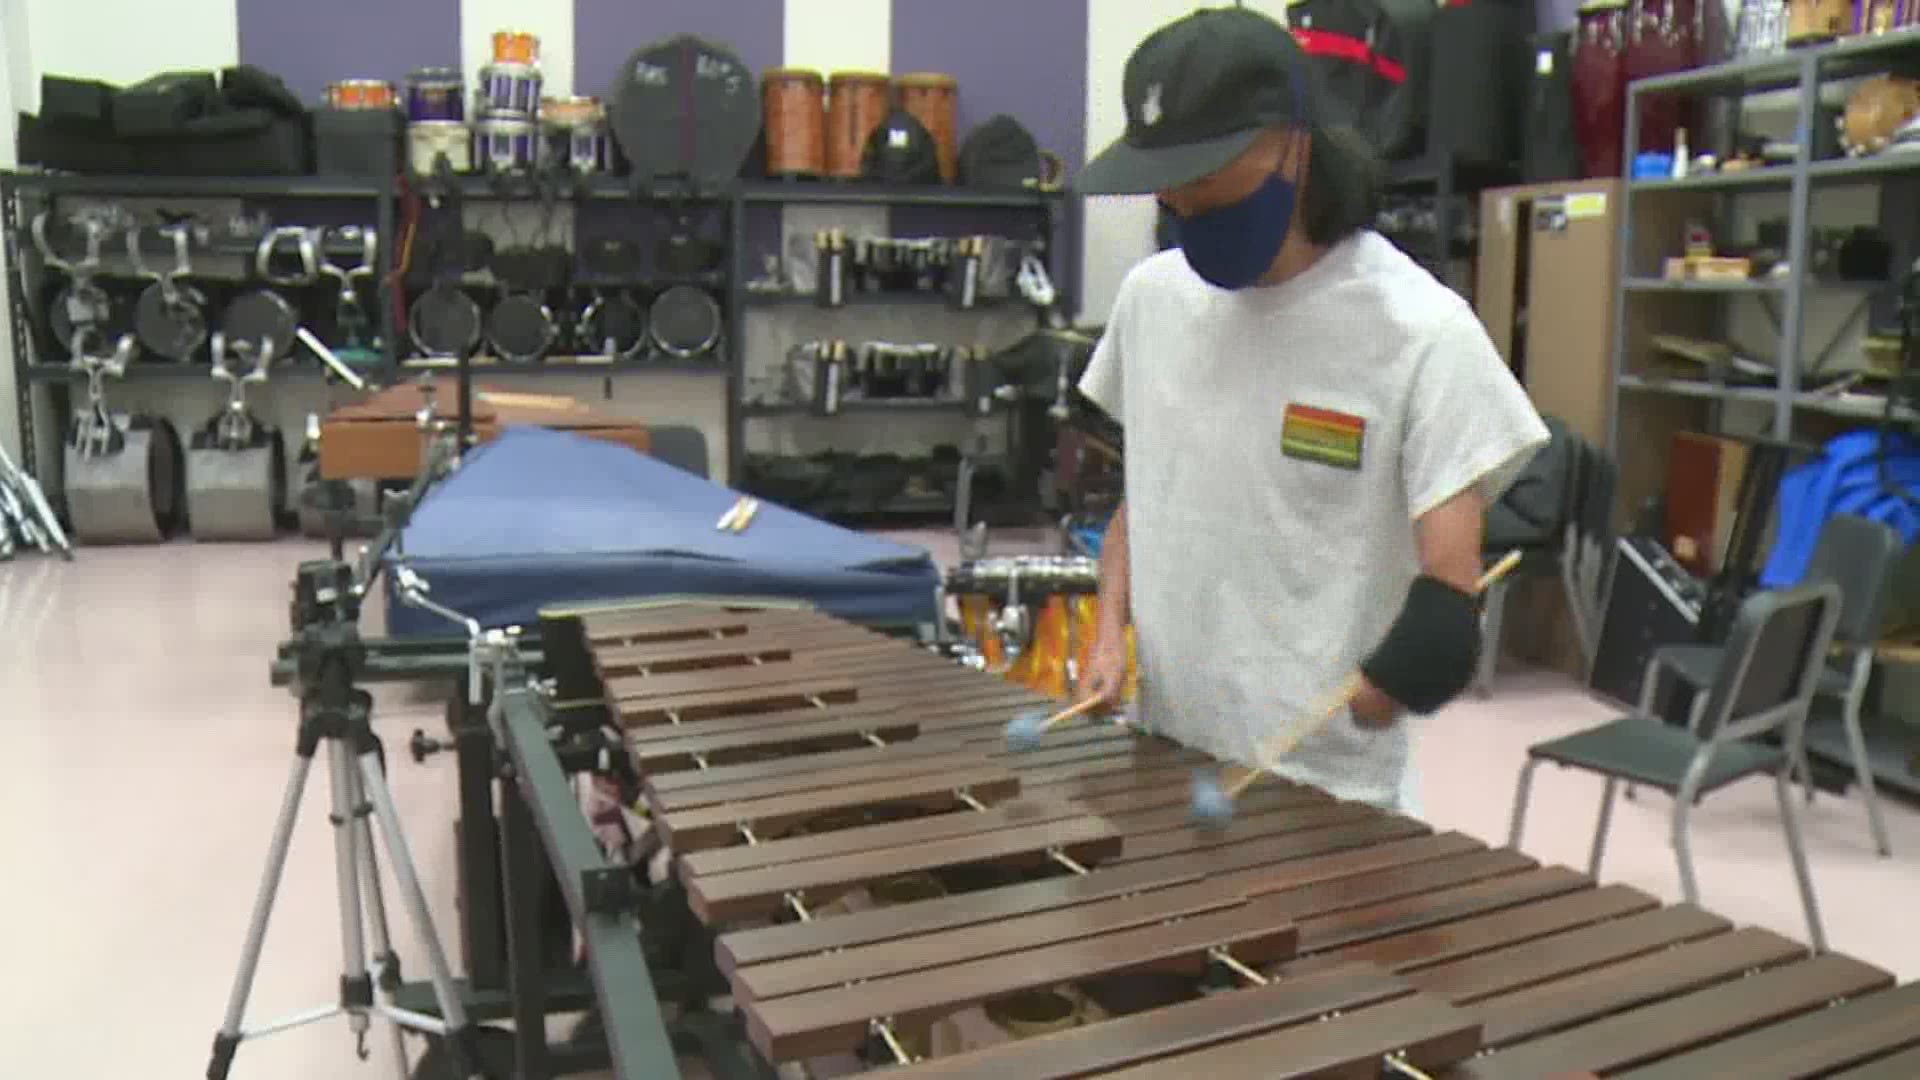 Jesus Salinas was burned so badly, he doesn't have two hands to hold mallets. Leave it to a teacher to help the teen figure out a way. Melissa Correa has more.